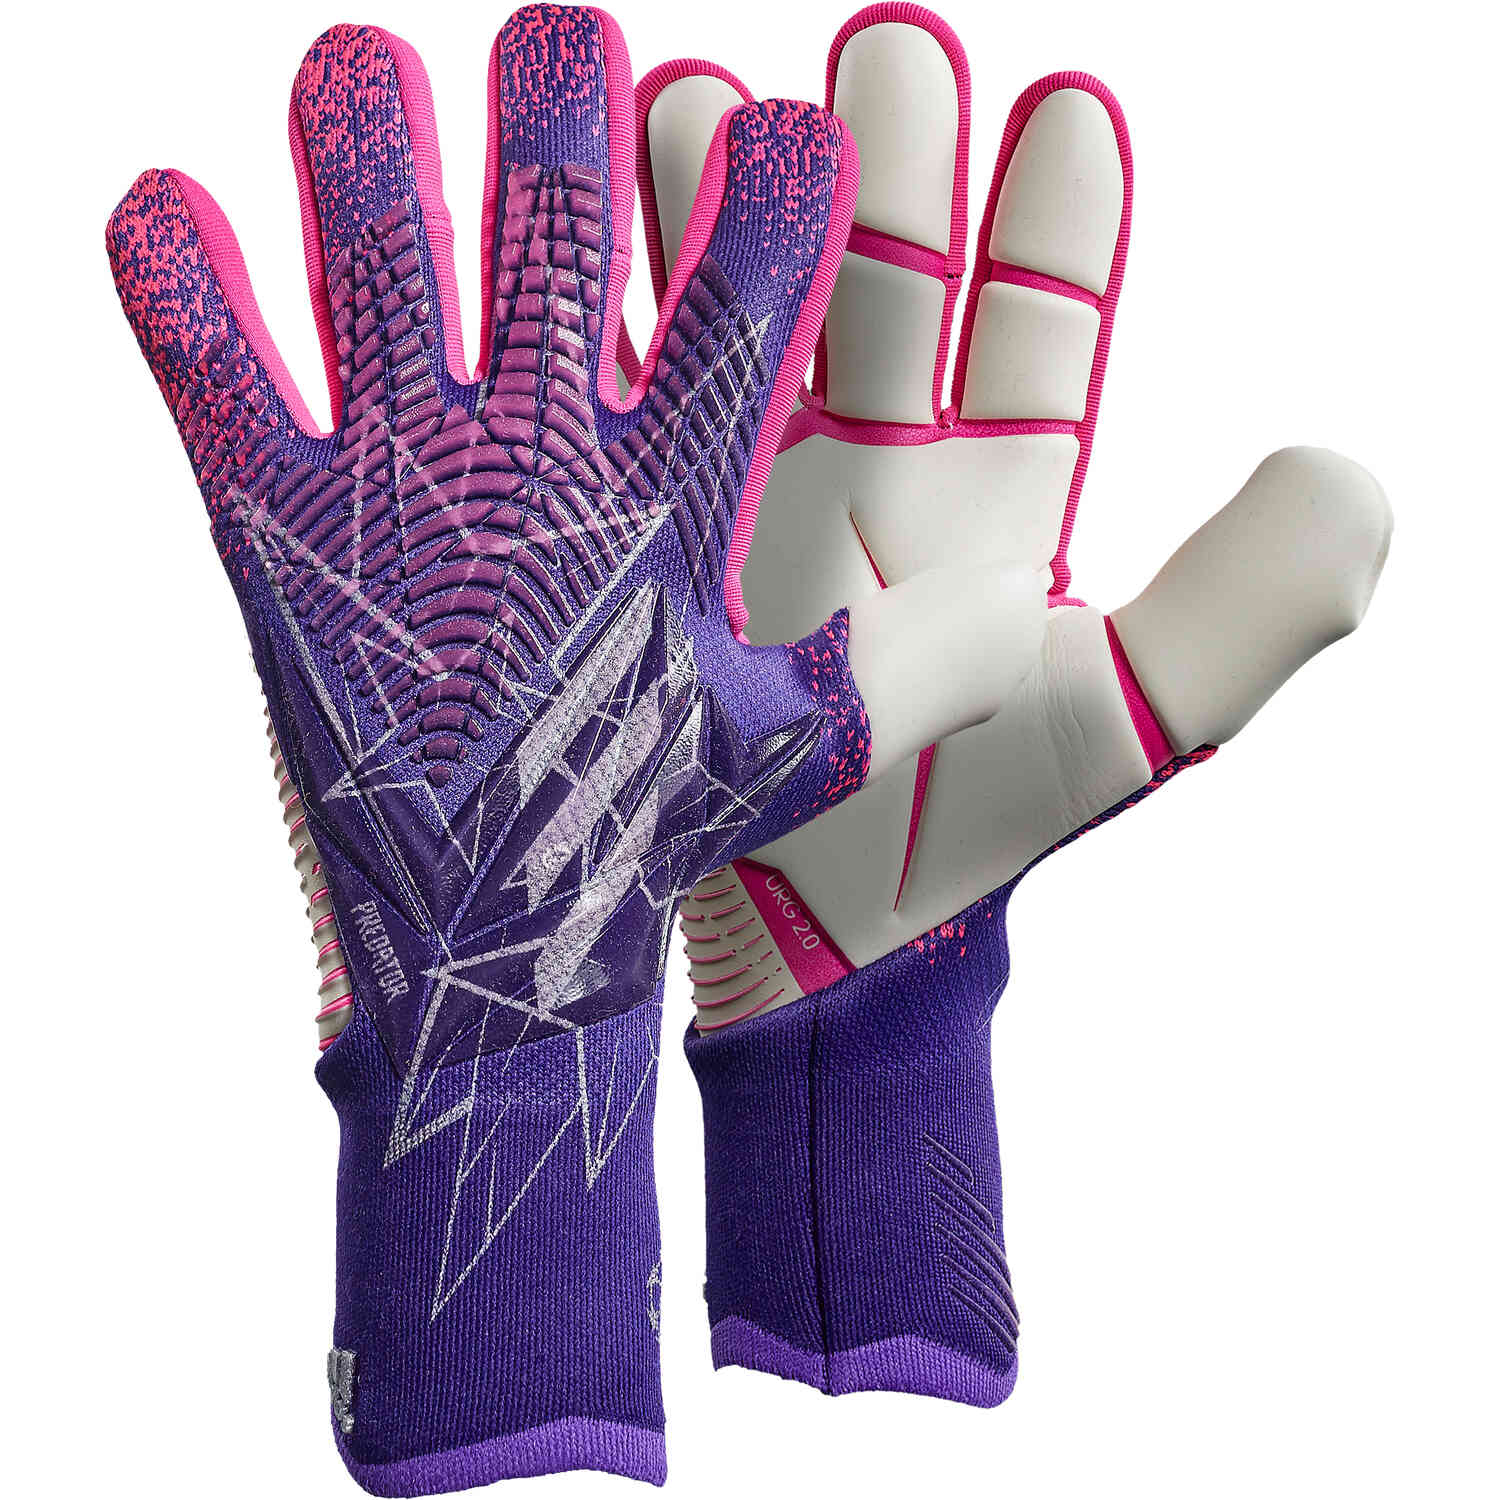 Official ARSENAL FC Goalie Goalkeeper GLOVES Youths Average 10 to 13 years 